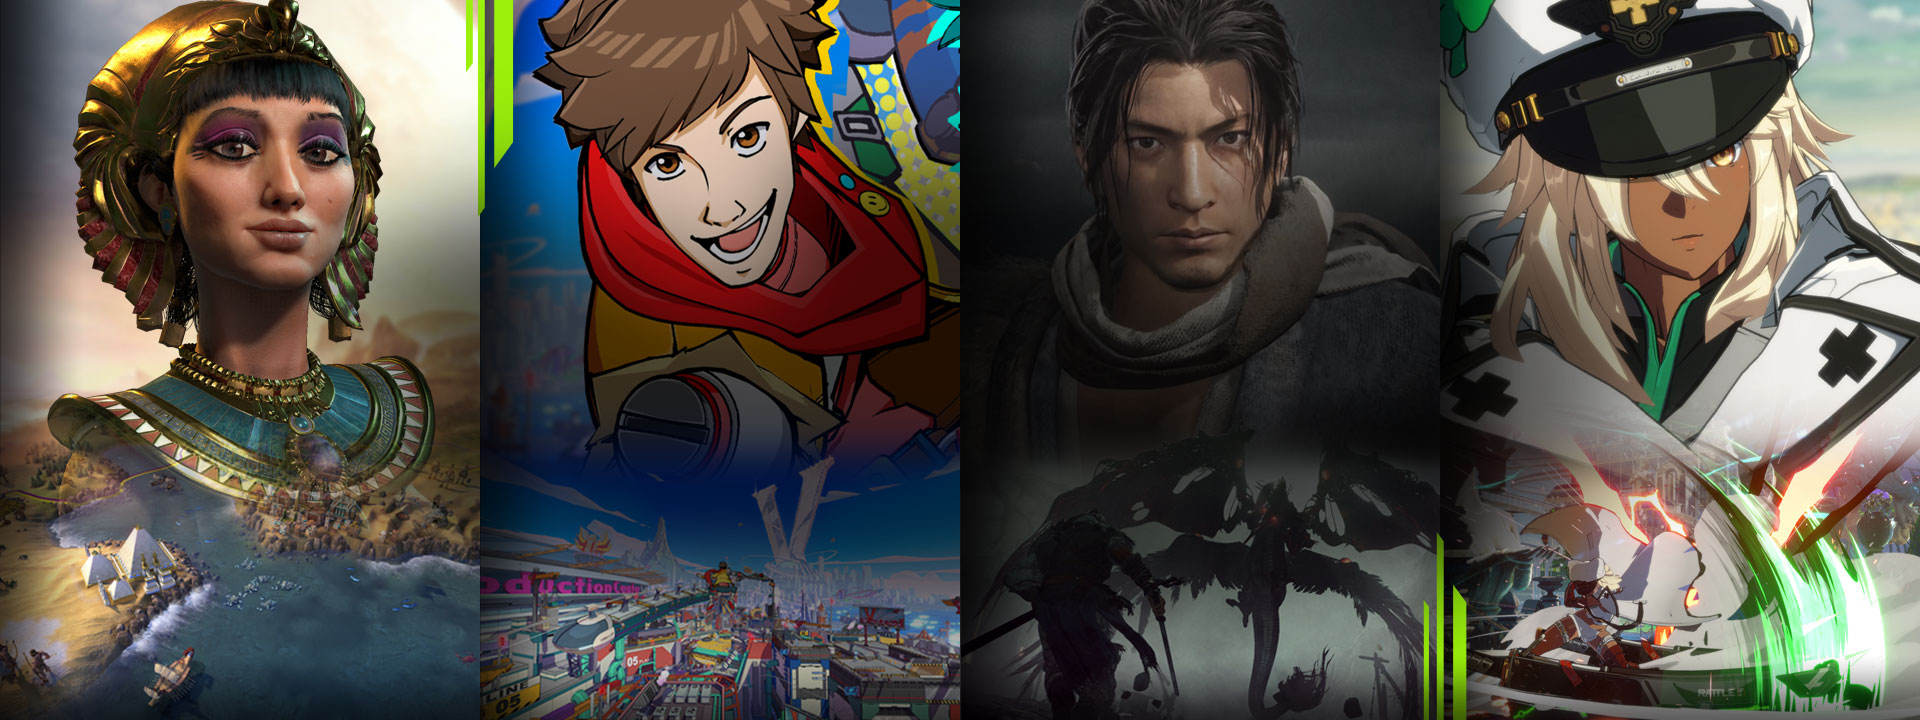 A selection of games available with PC Game Pass including Sid Meier's Civilization VI, Hi-Fi Rush, Wo Long: Fallen Dynasty, and Guilty Gear Strive.